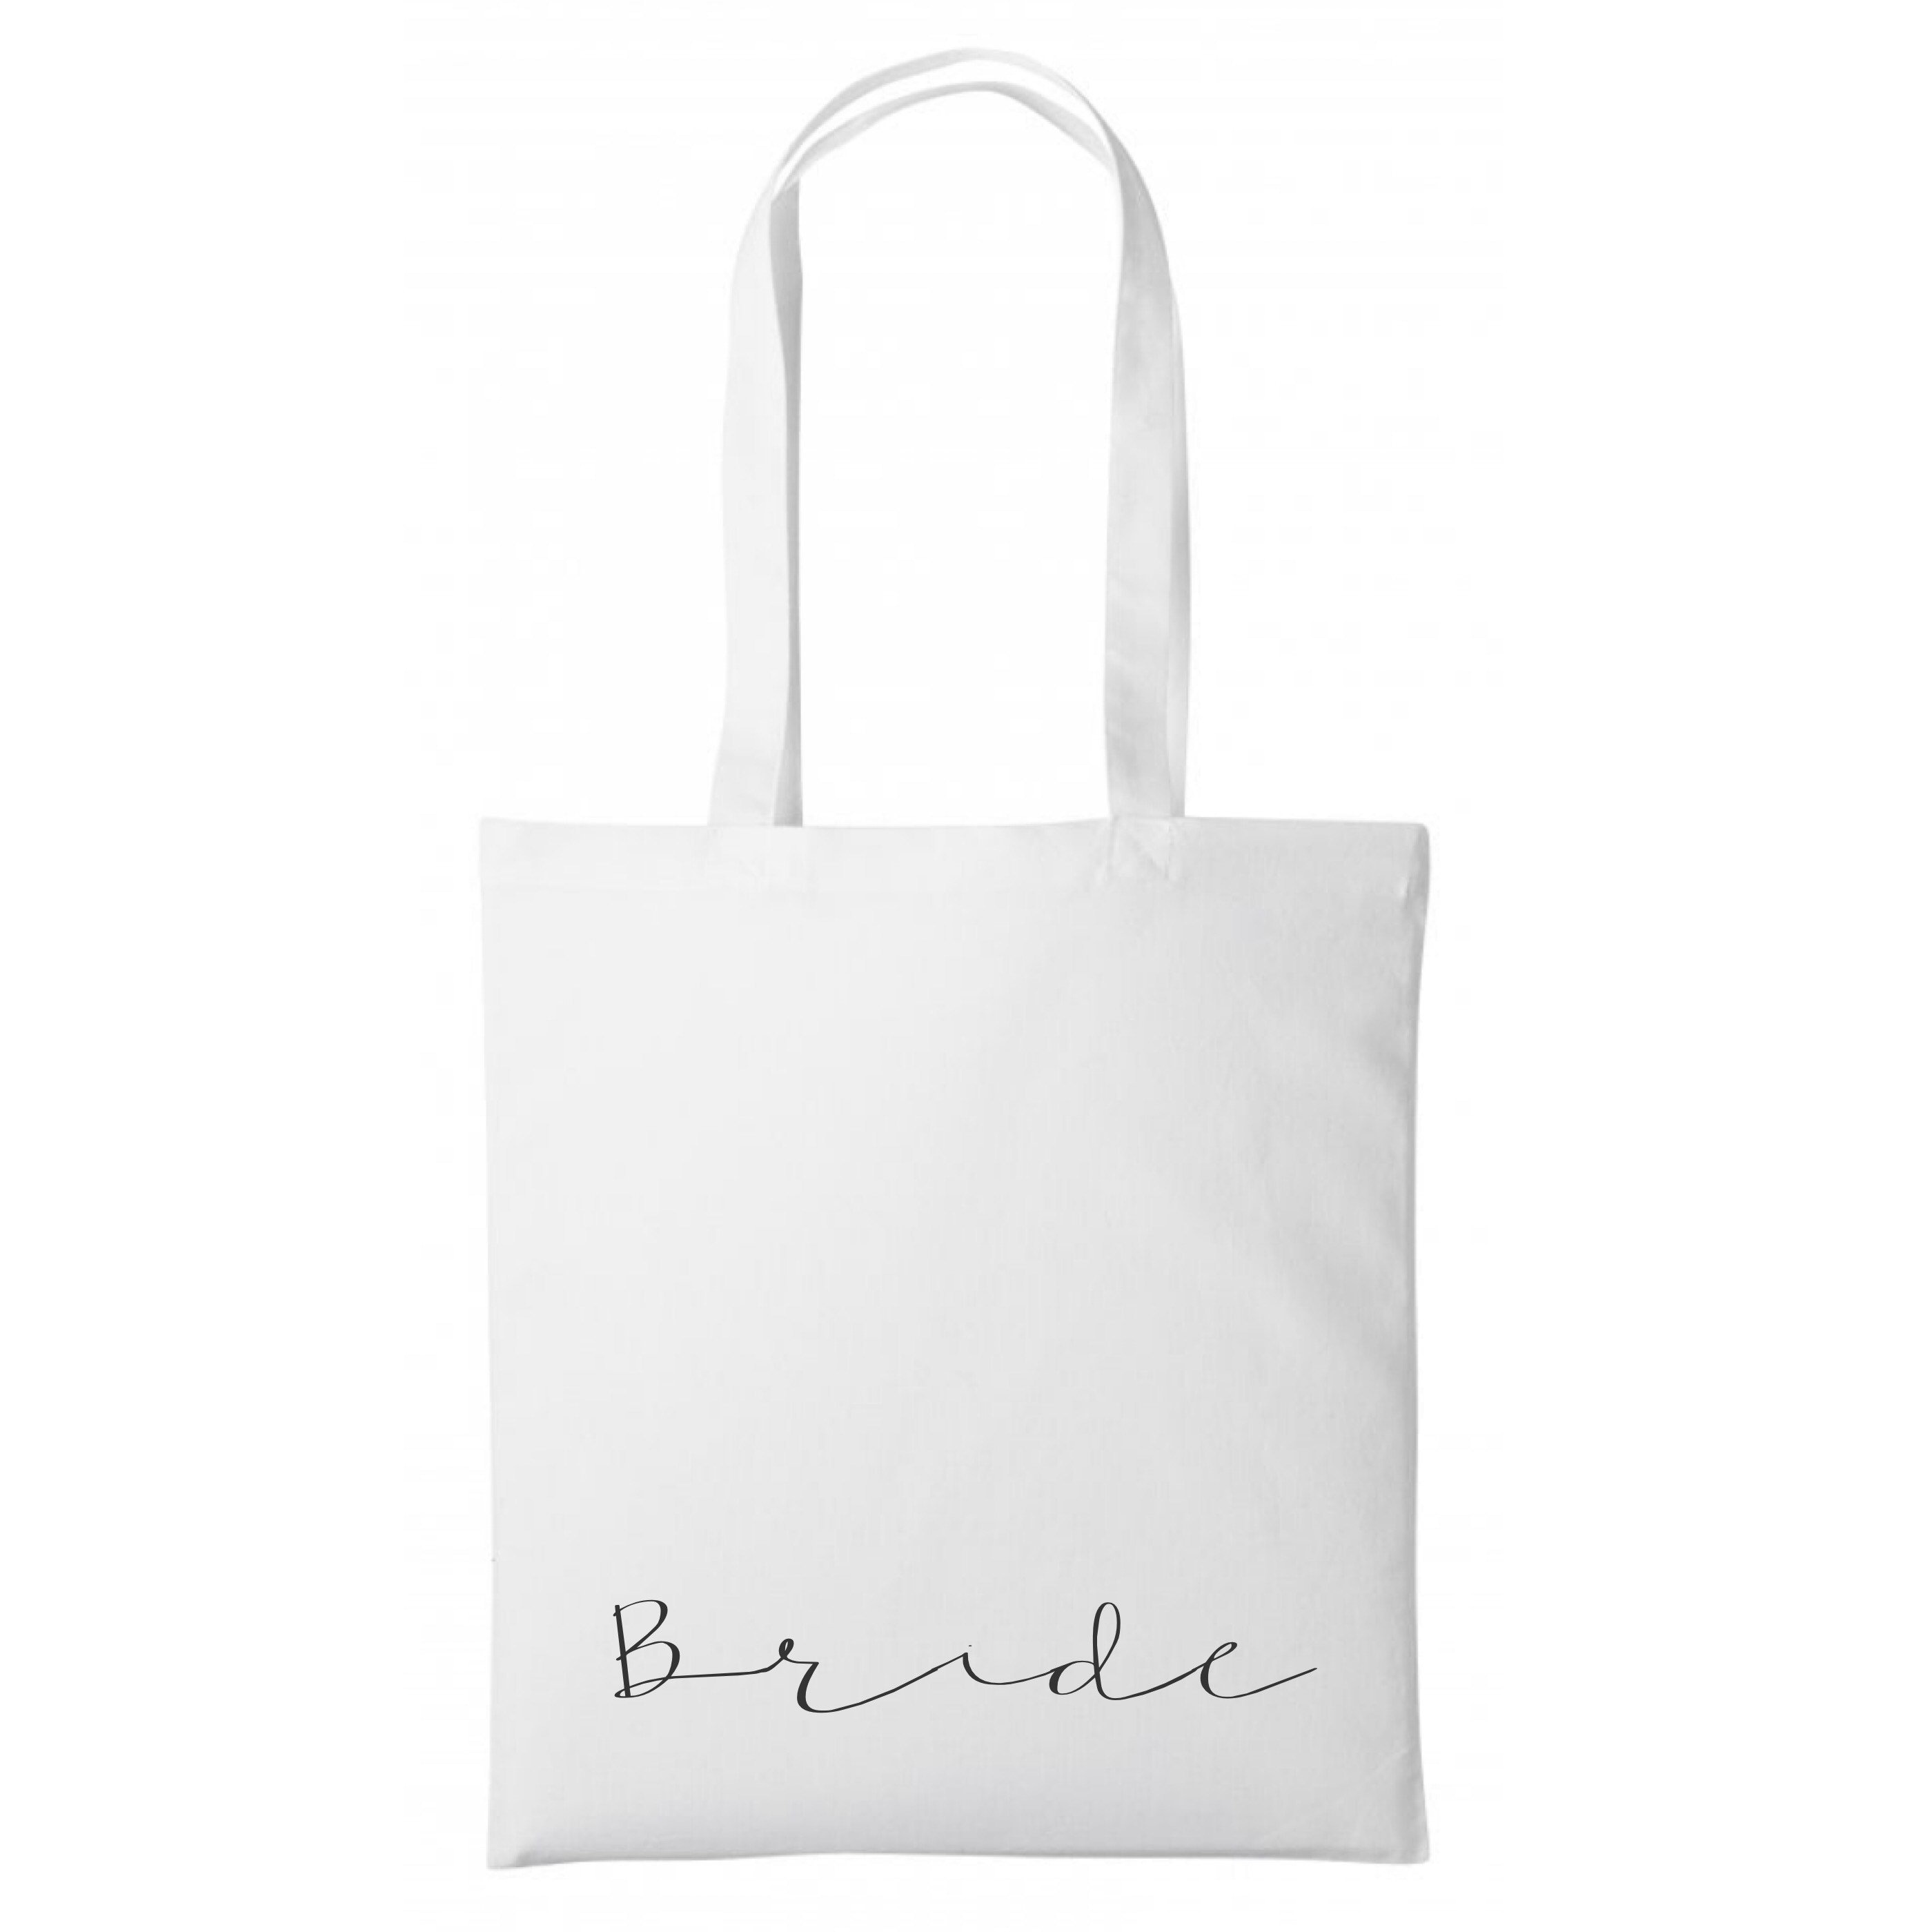 Tote bag | Custom tote | Add any text tote bag | Shopping bags | bags ...